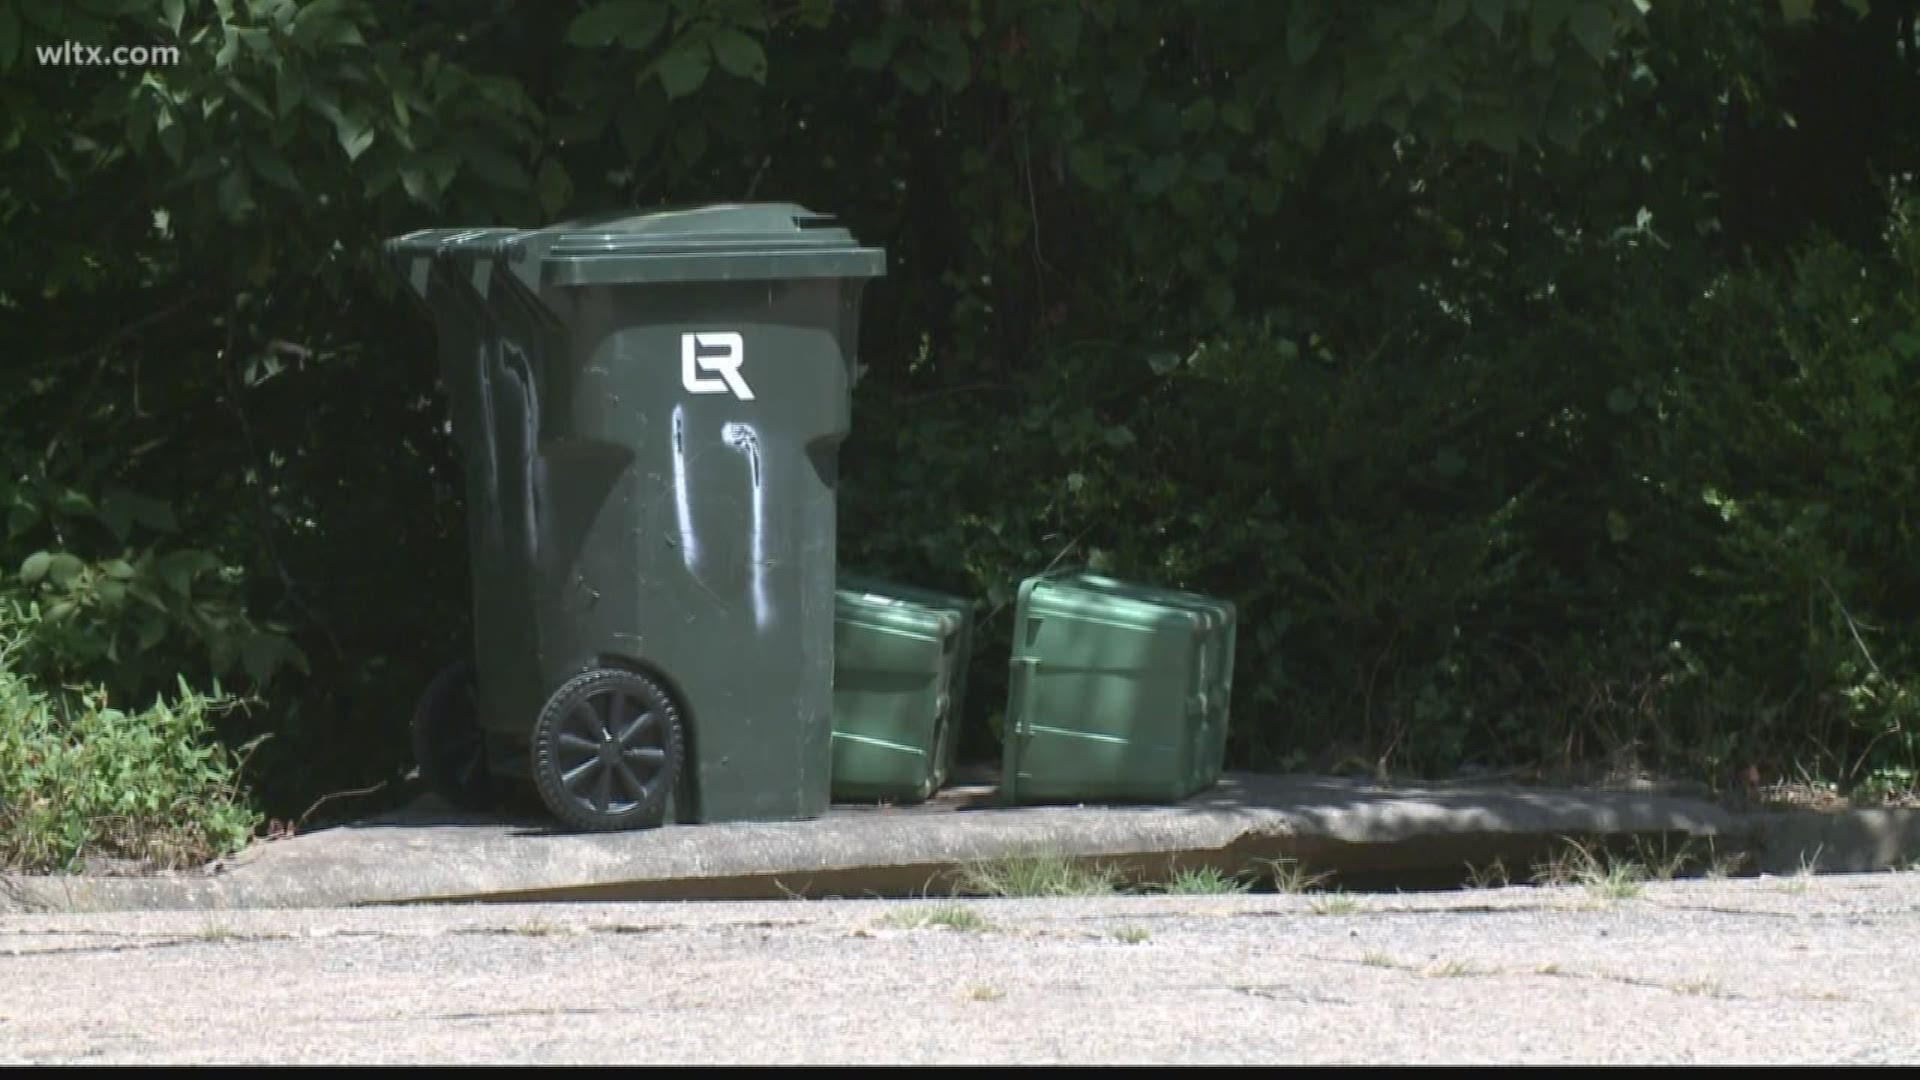 City of Columbia, Richland County modify trash collection during